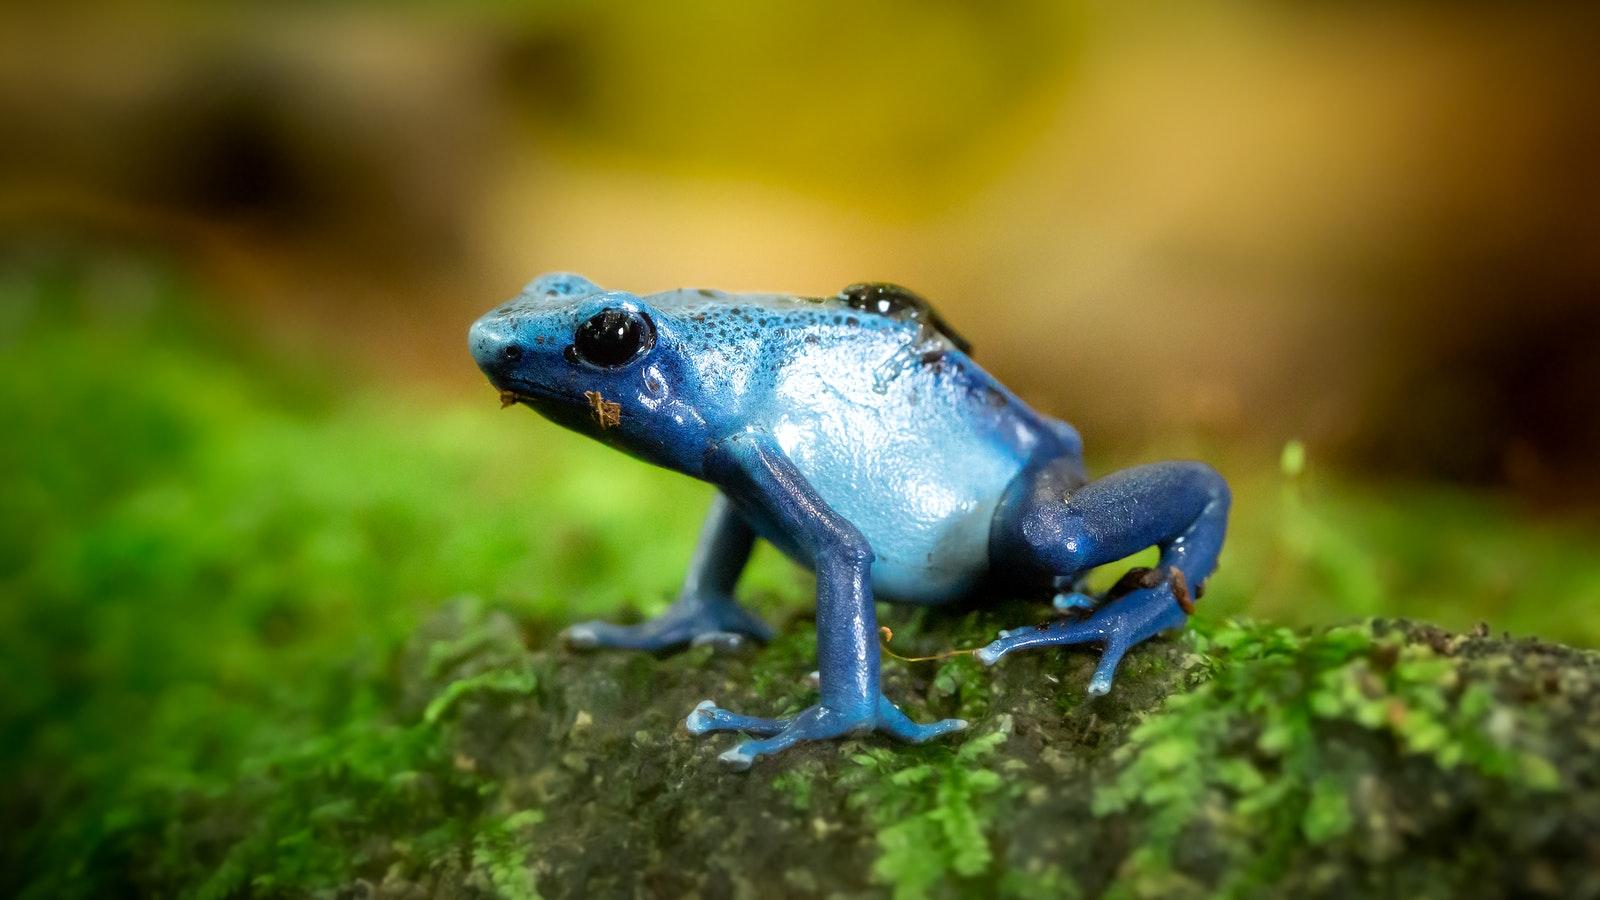 Closeup Photo of Blue Frog on Green Surface